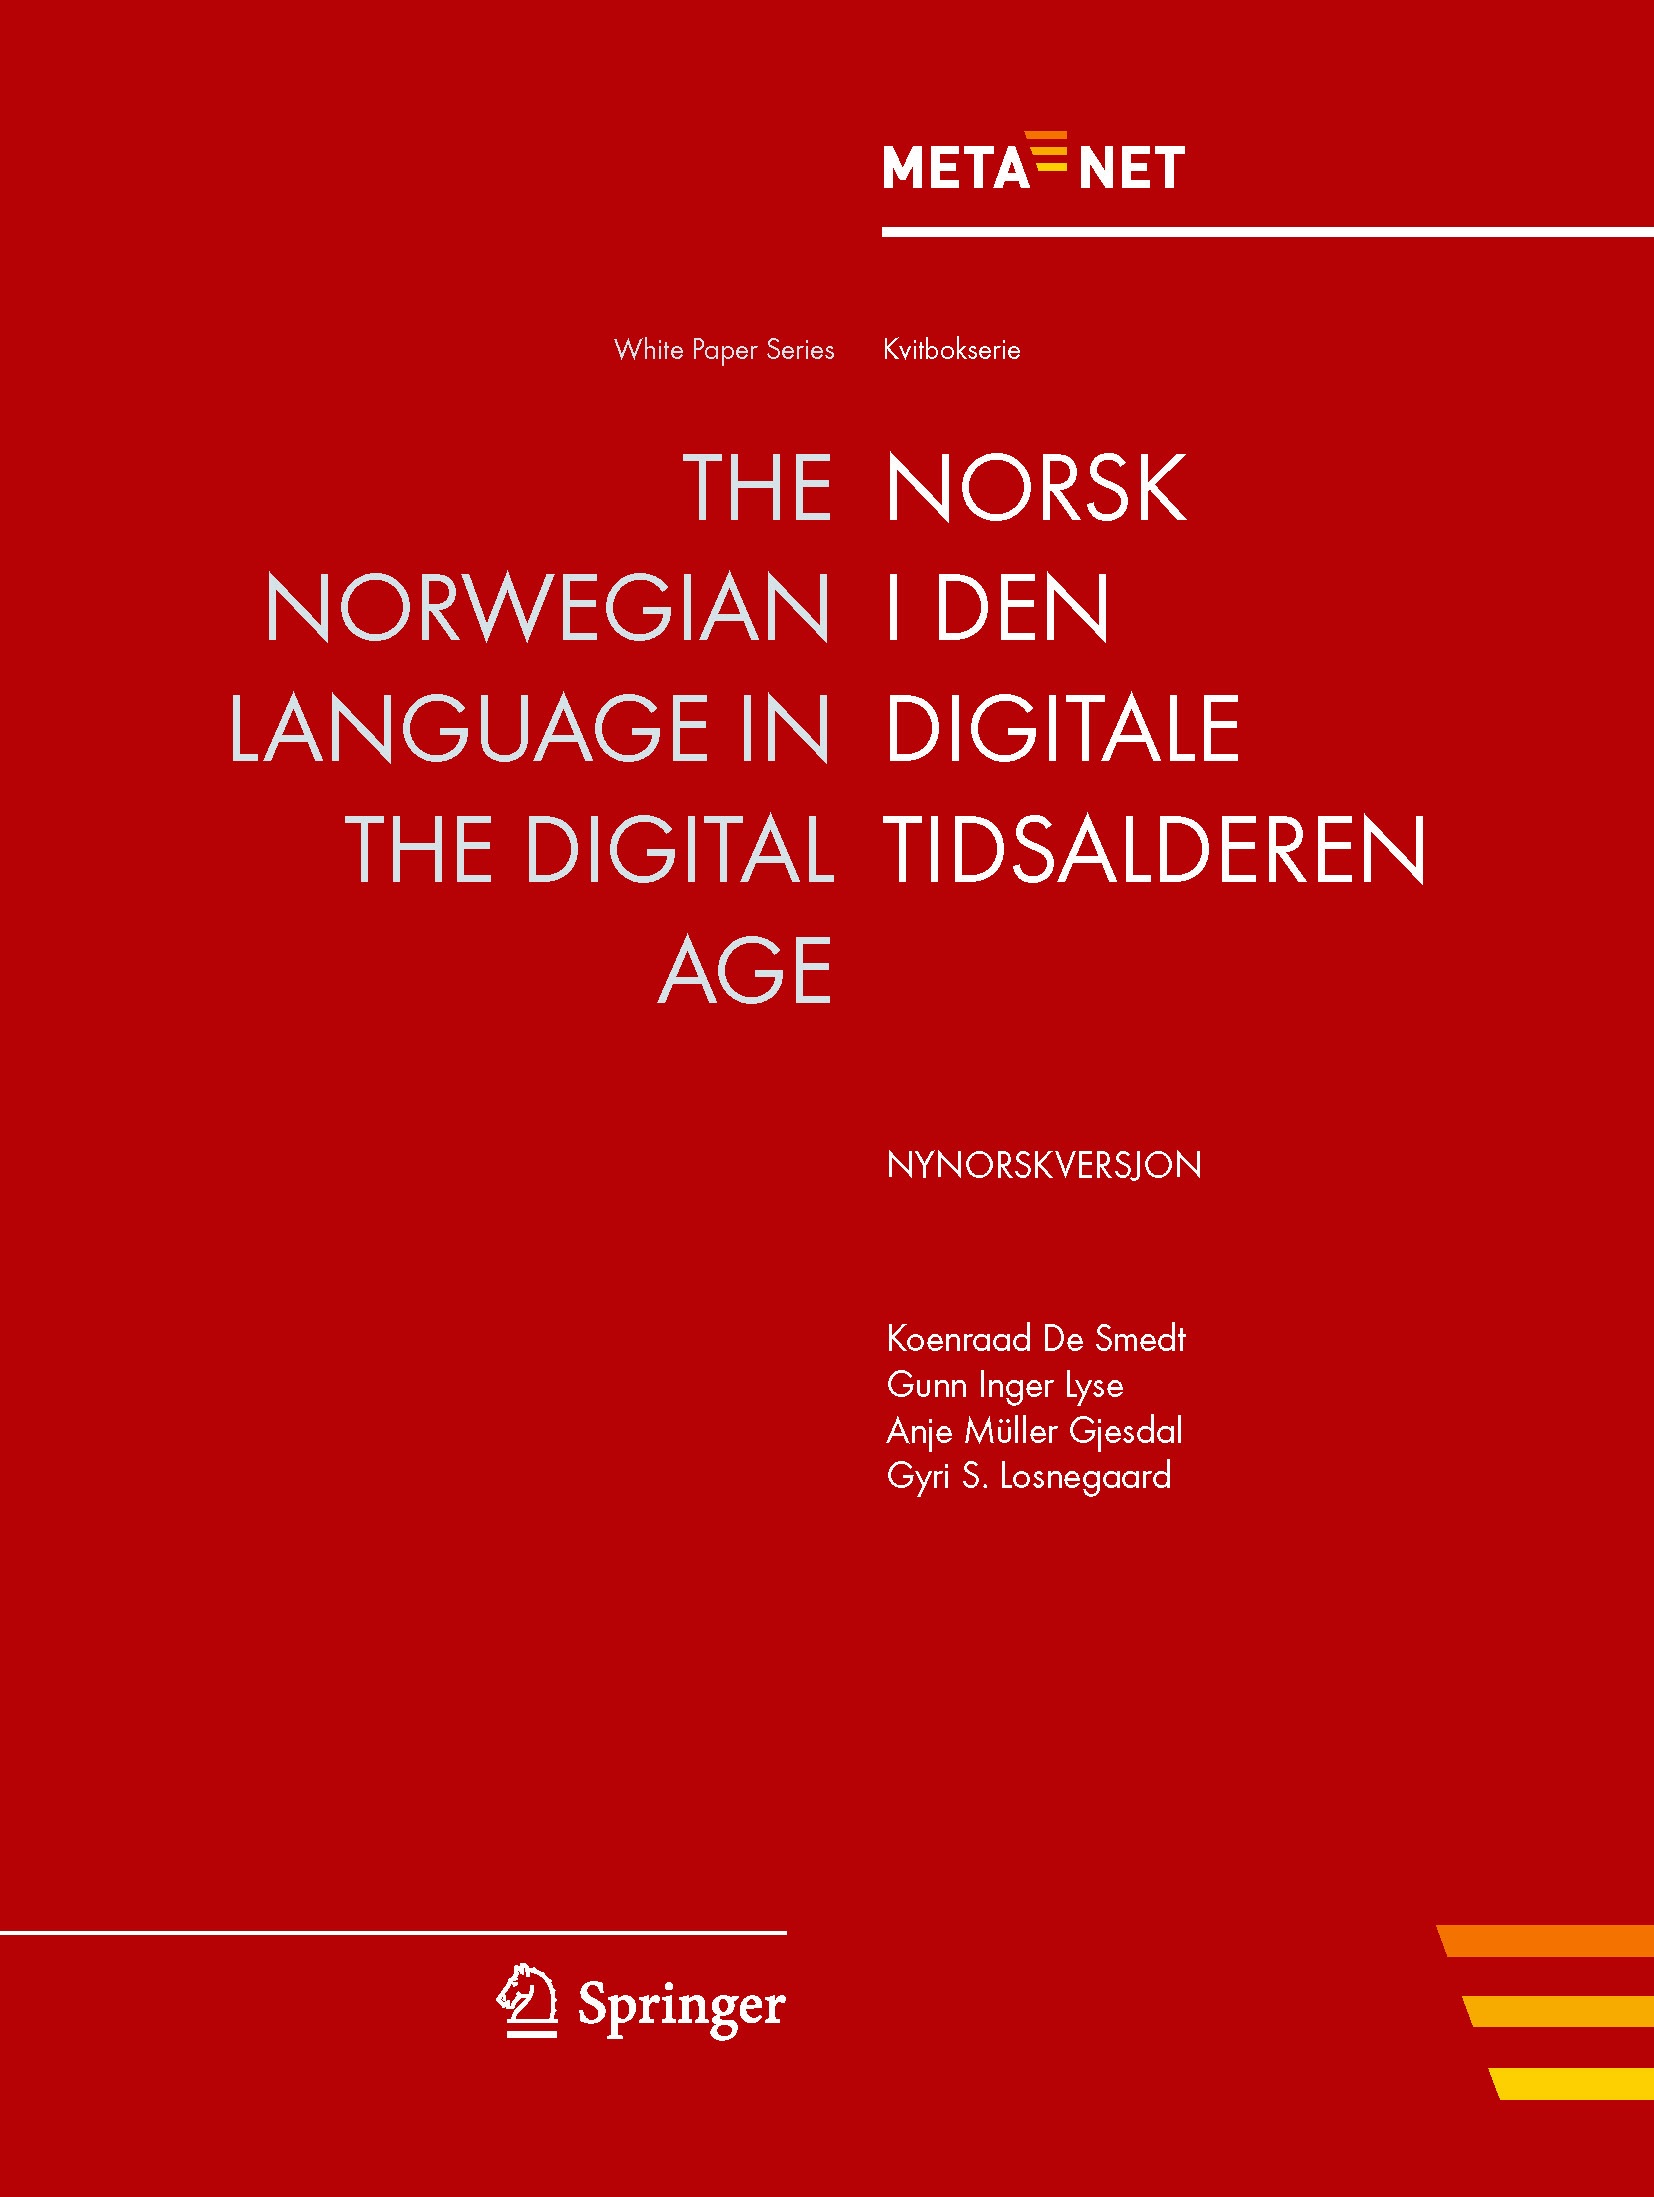 Cover of Norwegian whitepaper(Nynorsk Version)